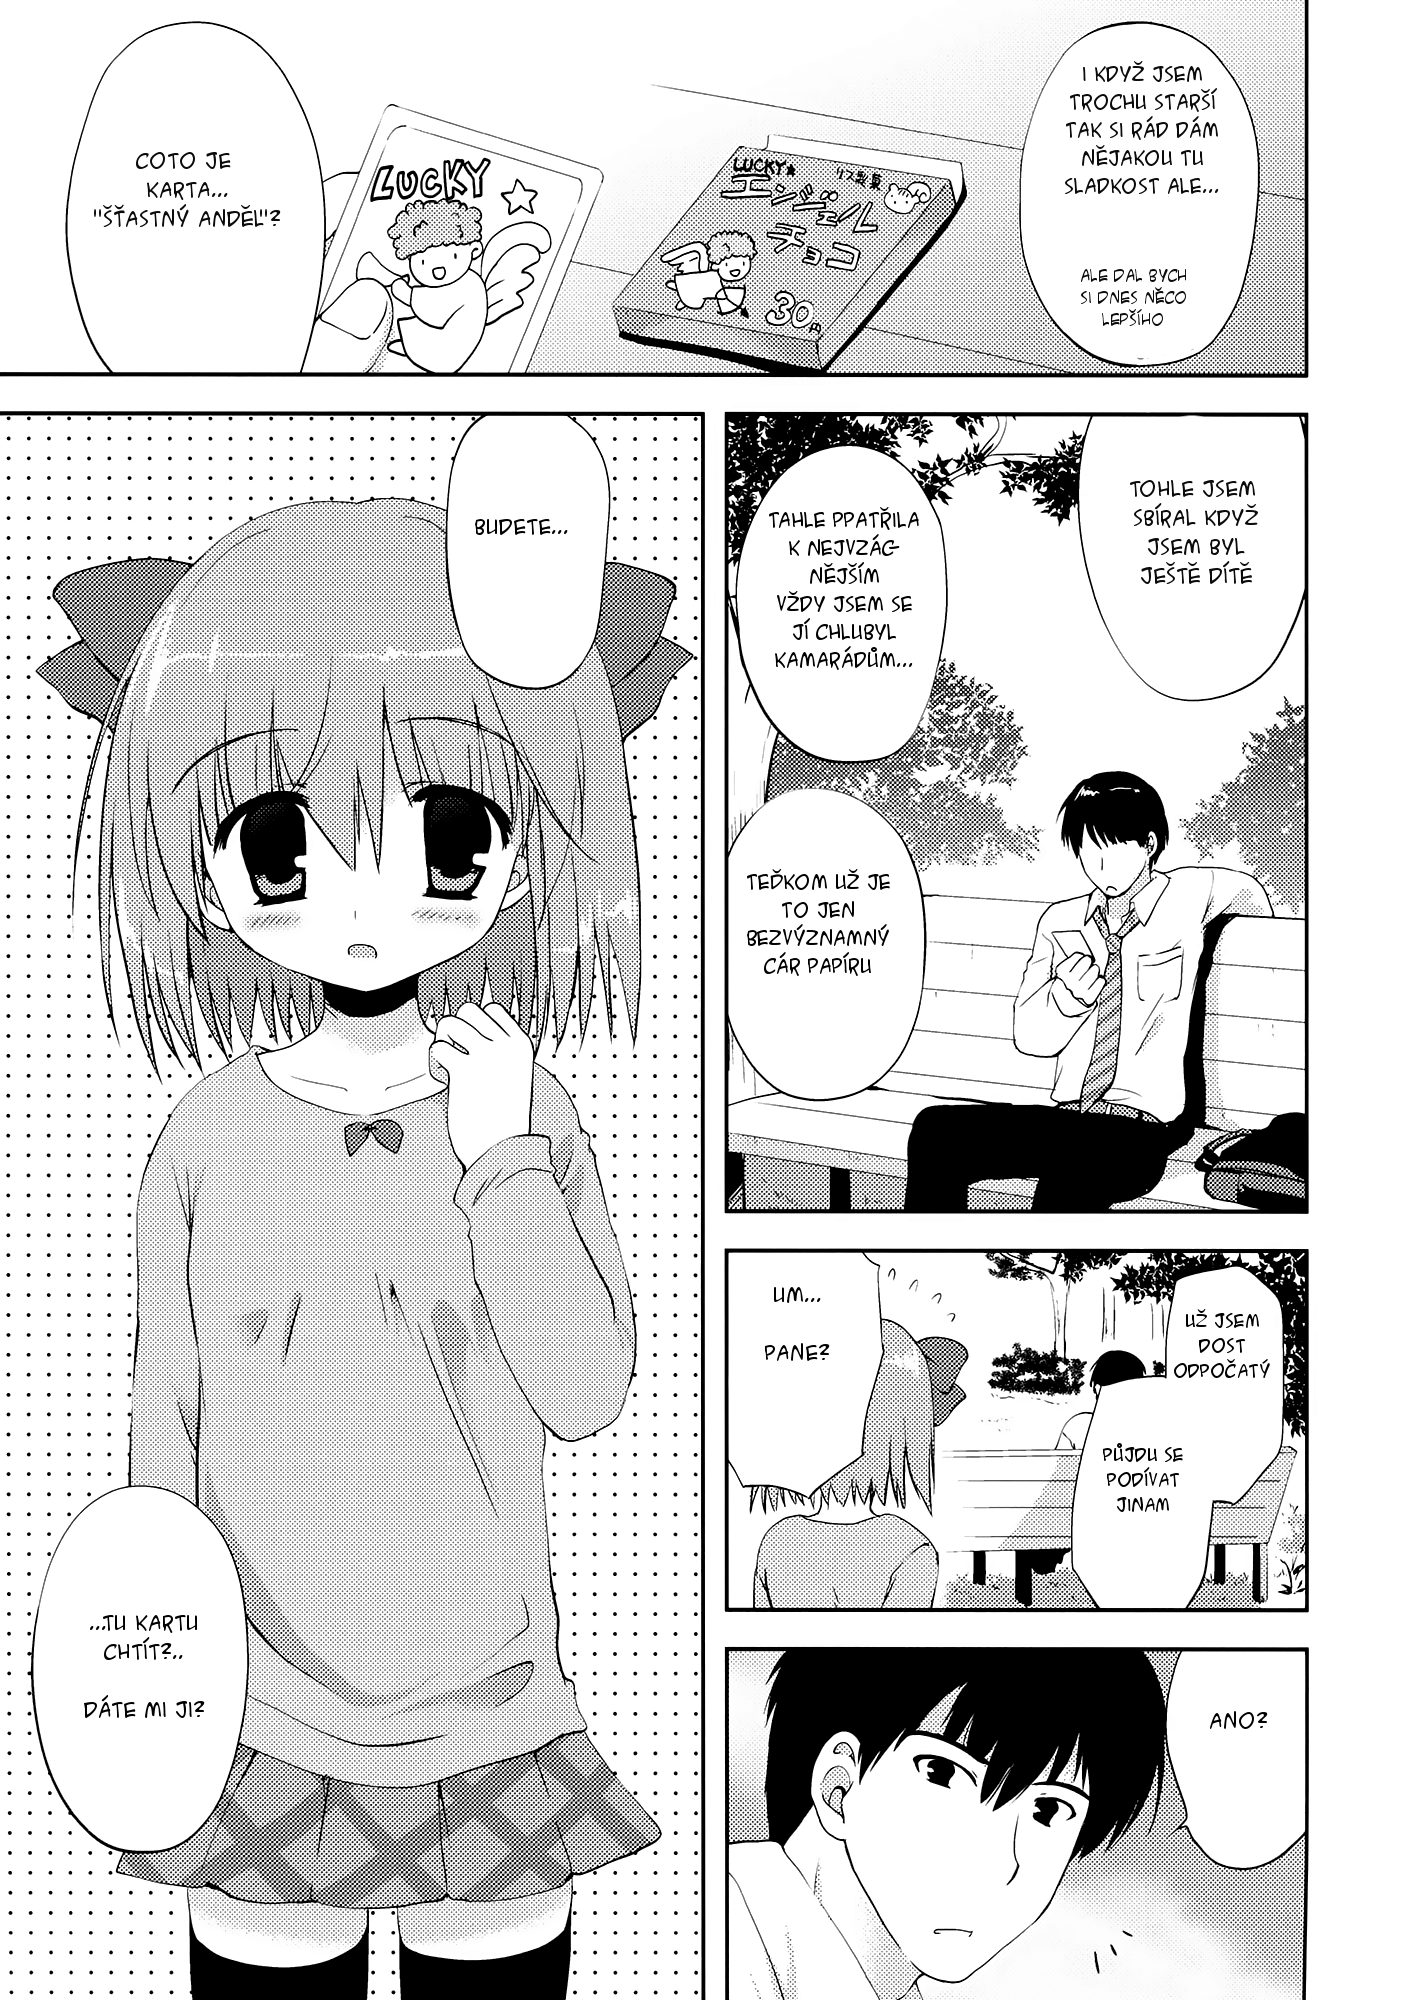 Doki The Story Of How I Did It With An Elementary Schooler For Only 30 Yen Original Page 01